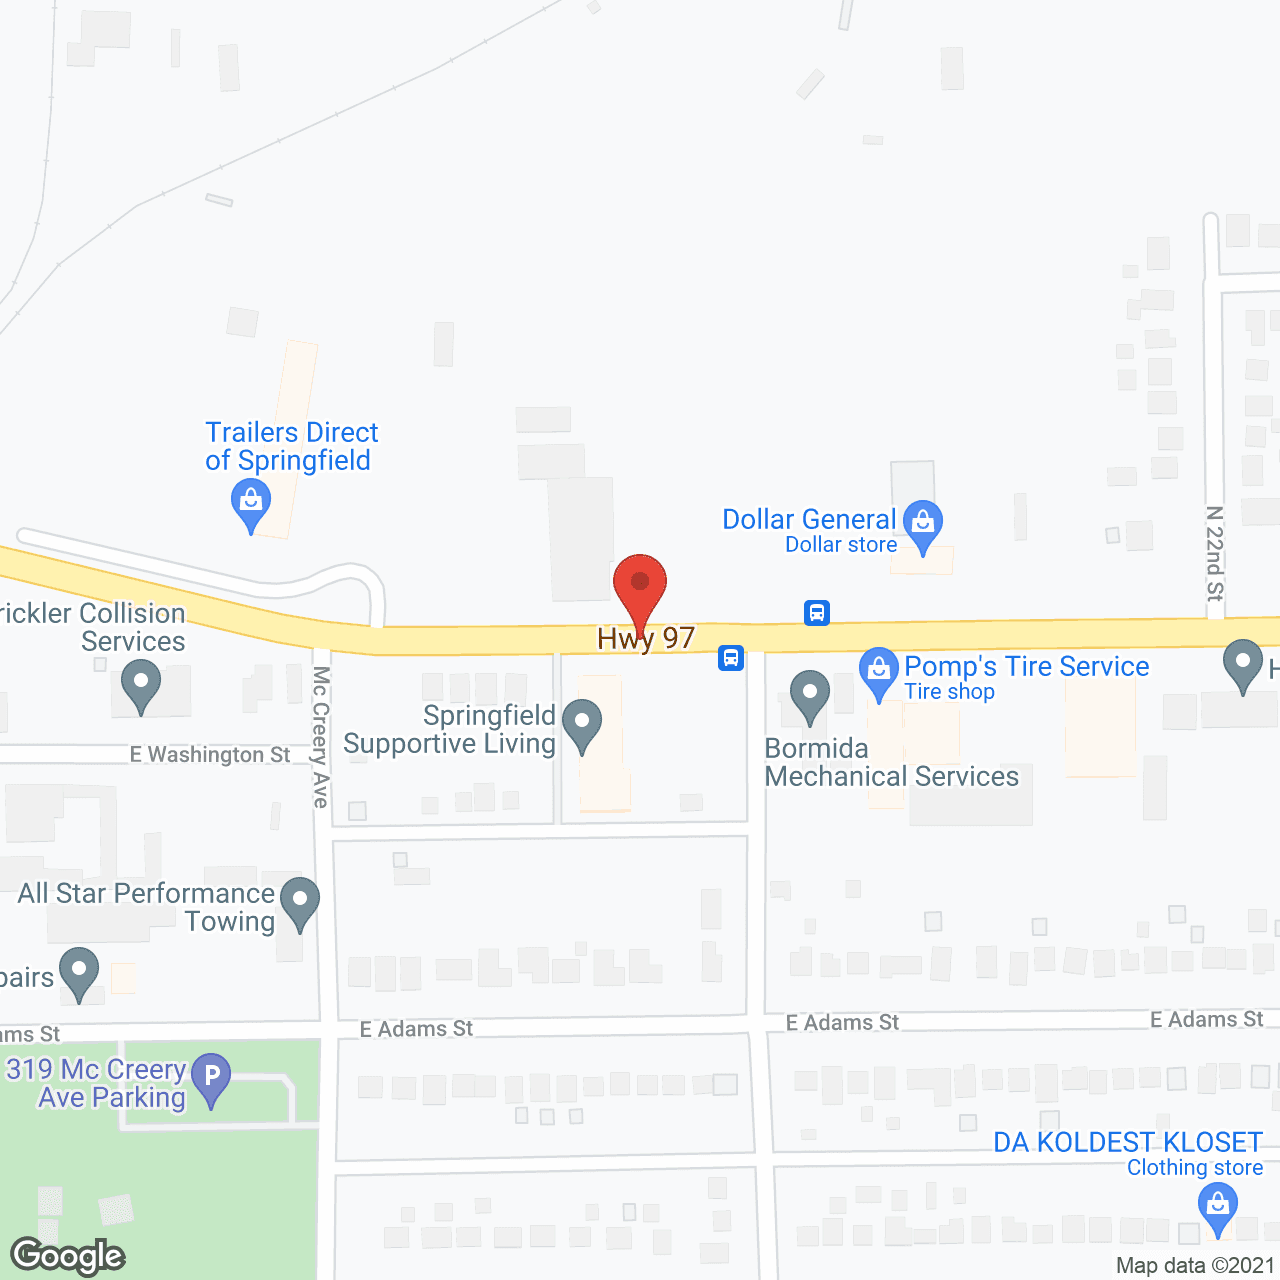 Springfield Supportive Living Center in google map